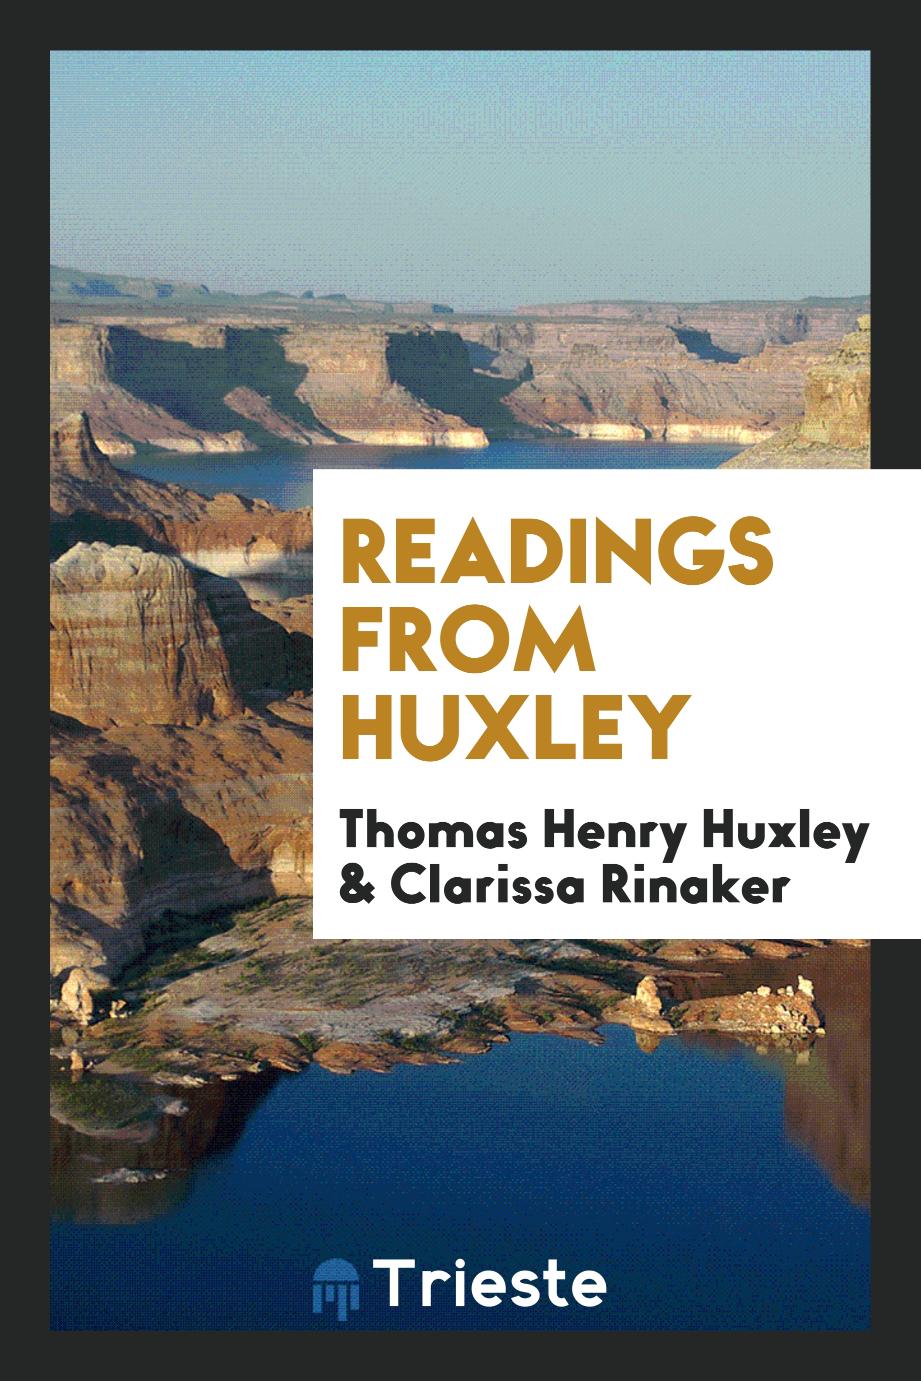 Readings from Huxley